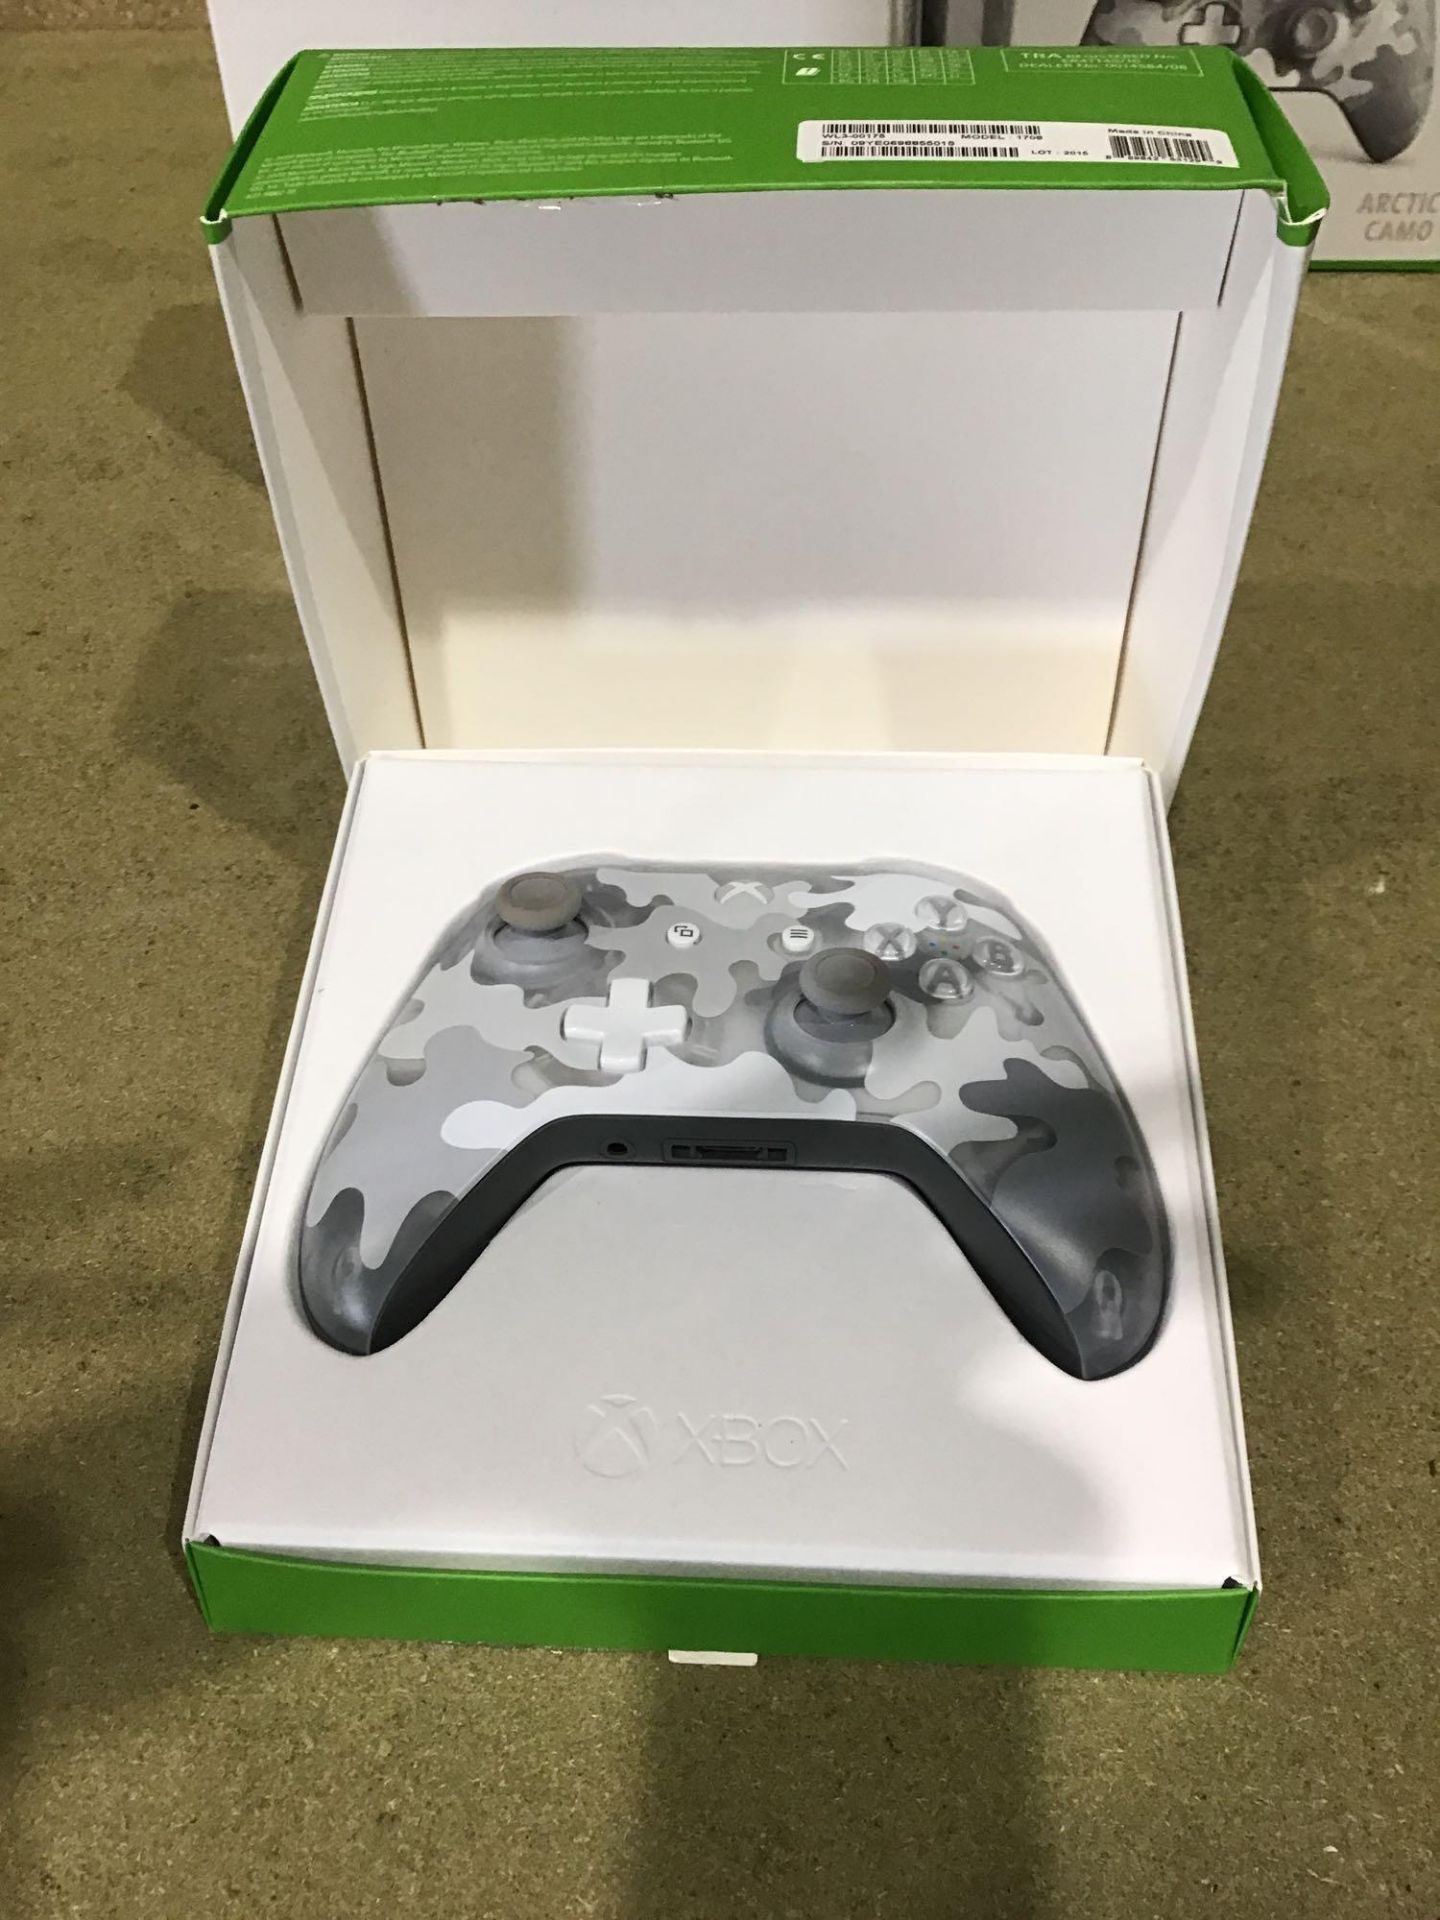 Official Xbox One Wireless Controller - Arctic Camo 735/2012 £64.99 RRP - Image 3 of 4